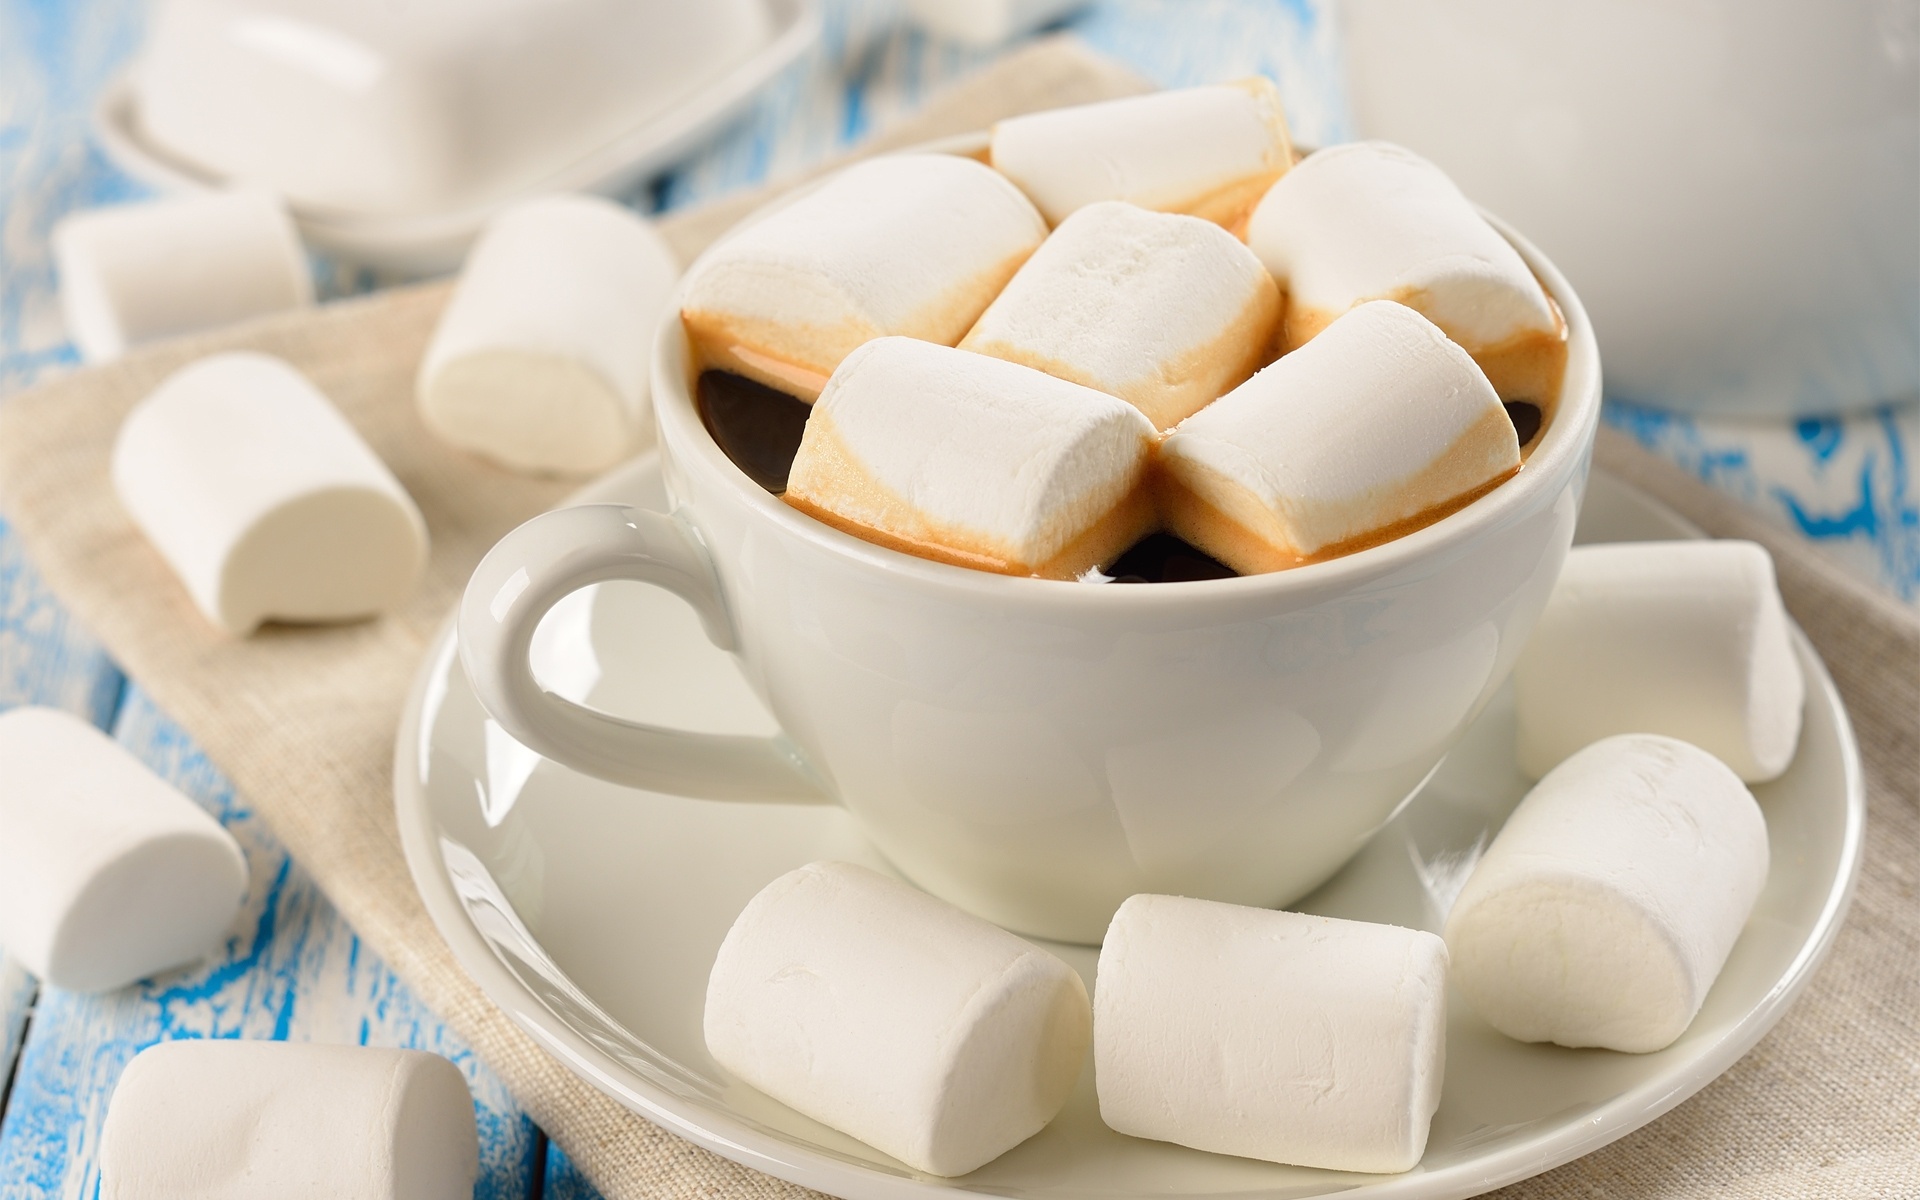 Sweet dessert delights, Marshmallow-topped drinks, Flavorful coffee cup treats, Chinese cuisine, 1920x1200 HD Desktop